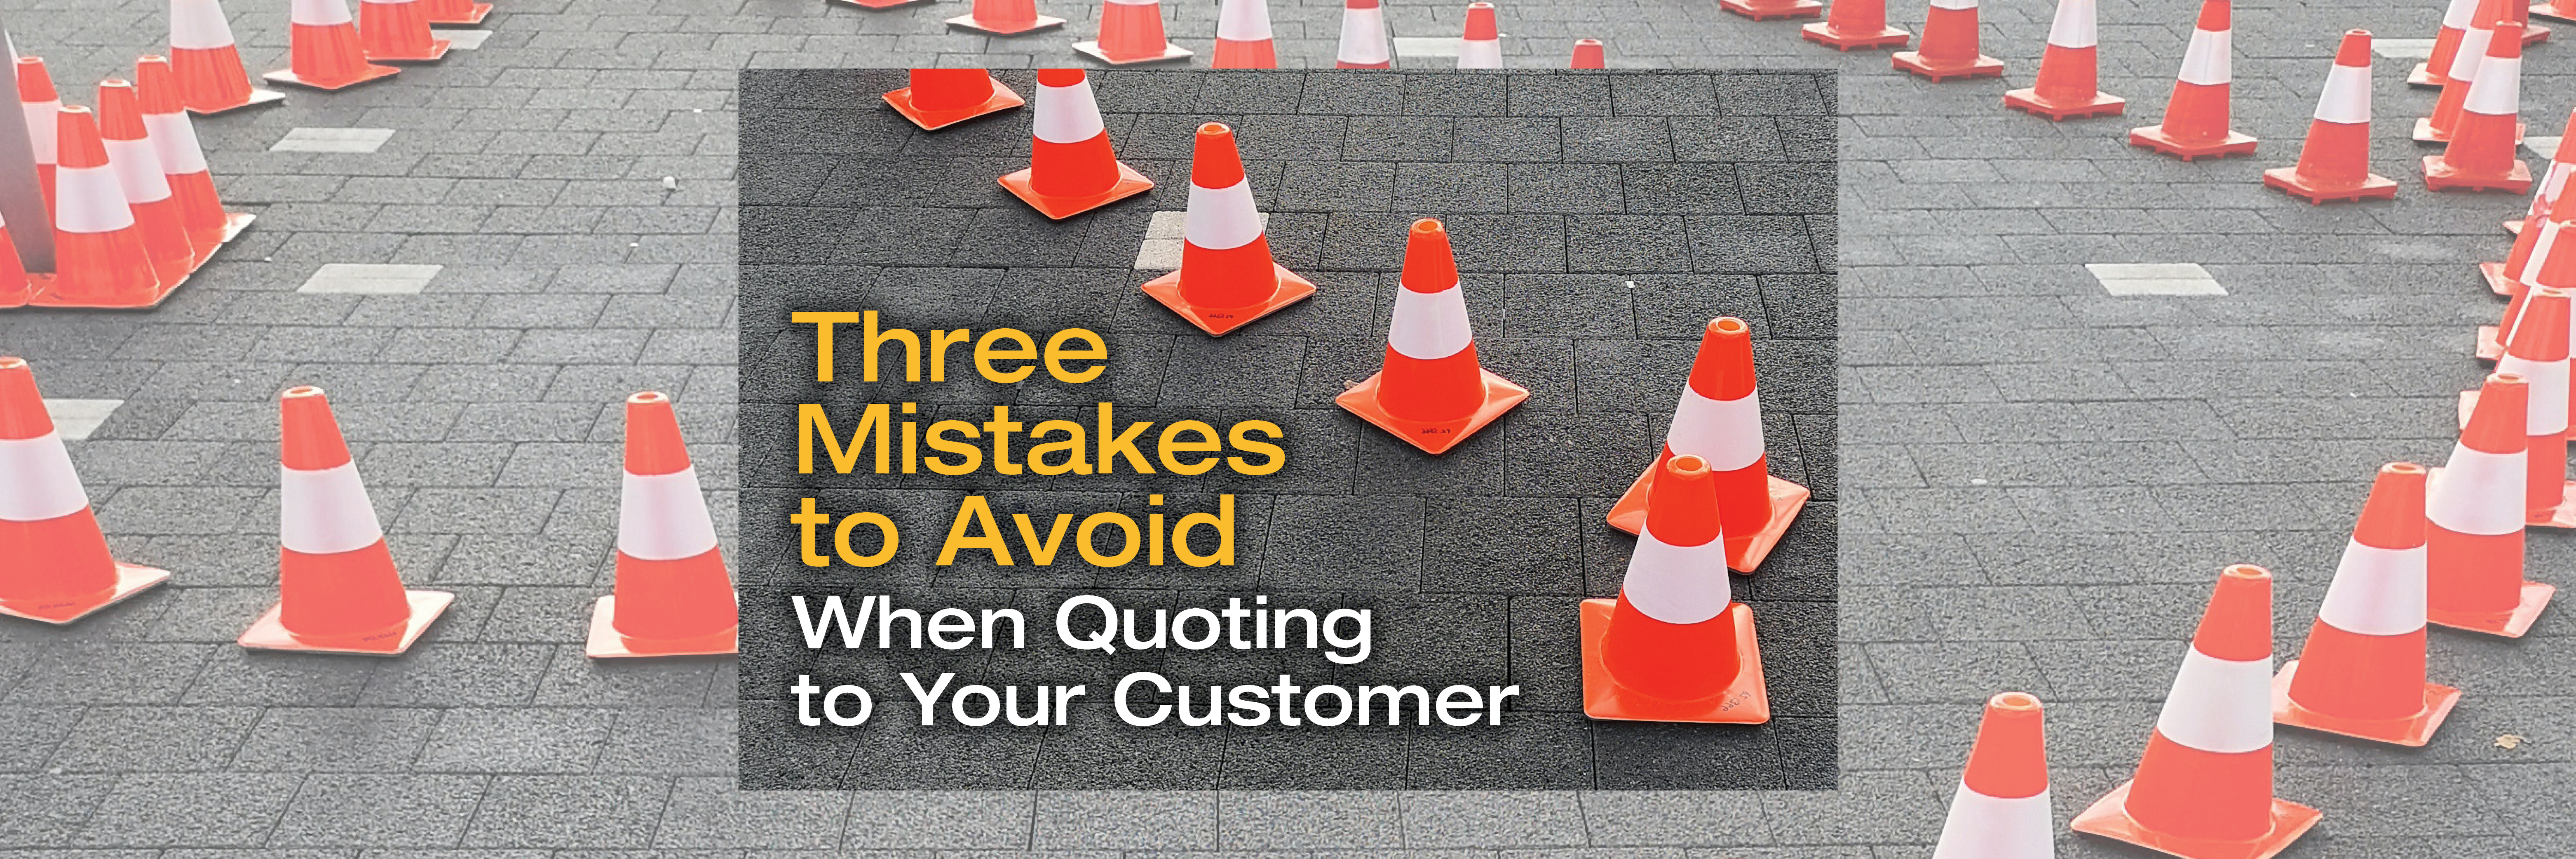 Three Mistakes to Avoid when Quoting to Prospects & Customers